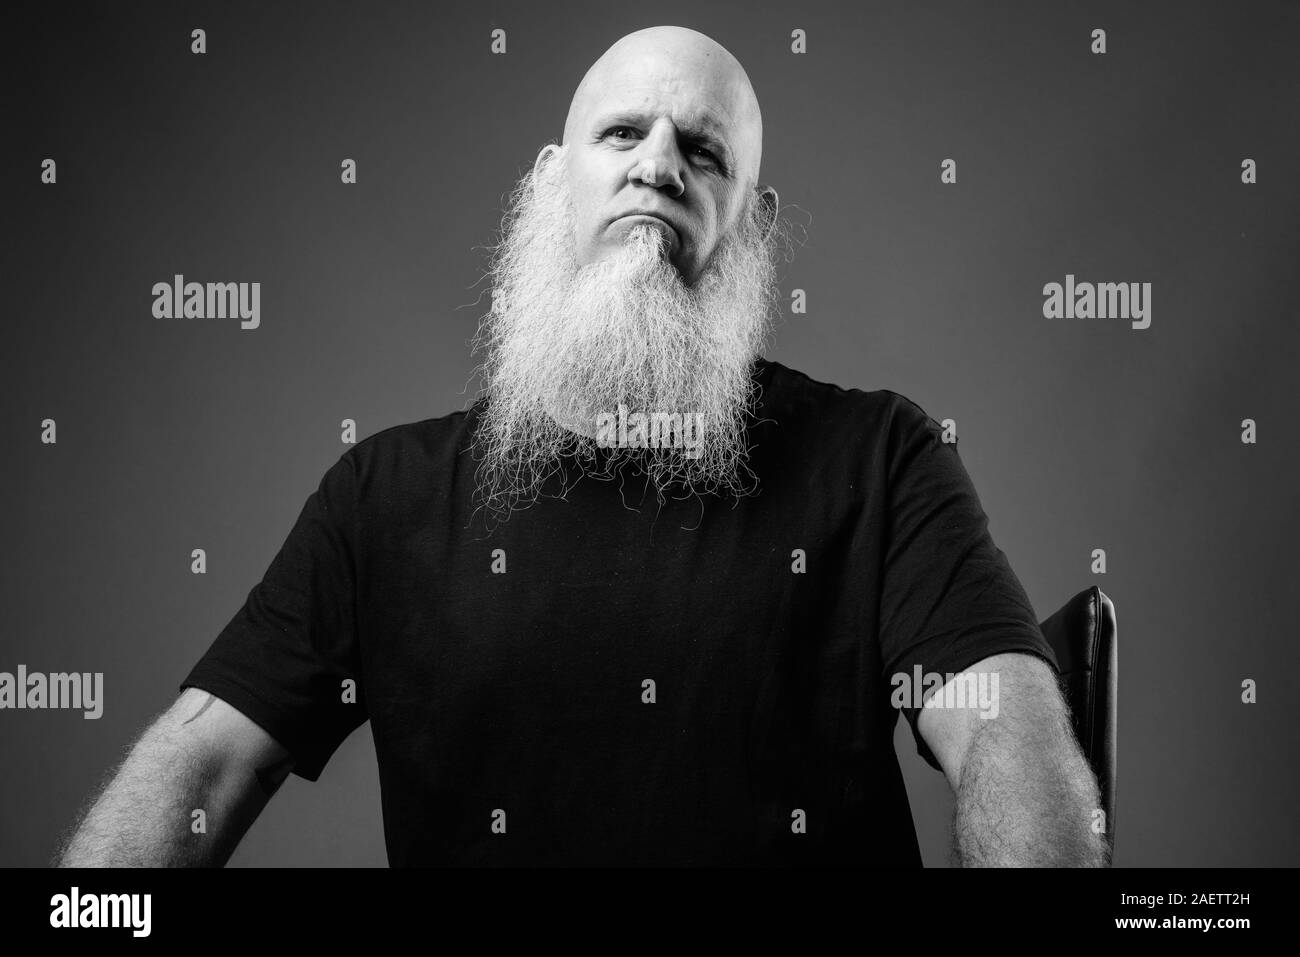 Mature bald man with long white beard in black and white Stock Photo